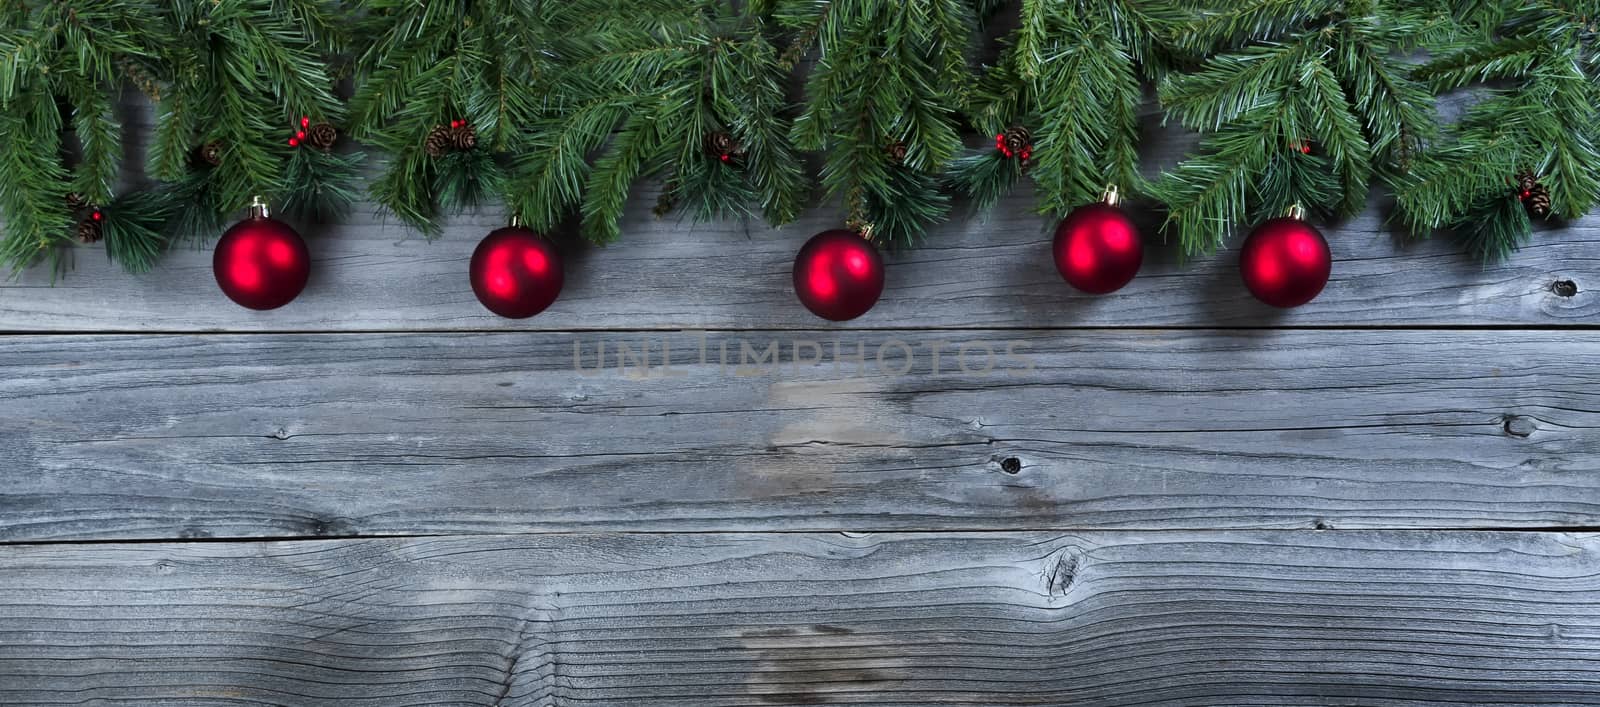 Christmas rustic natural wooden background with evergreen branches and red ball ornaments  